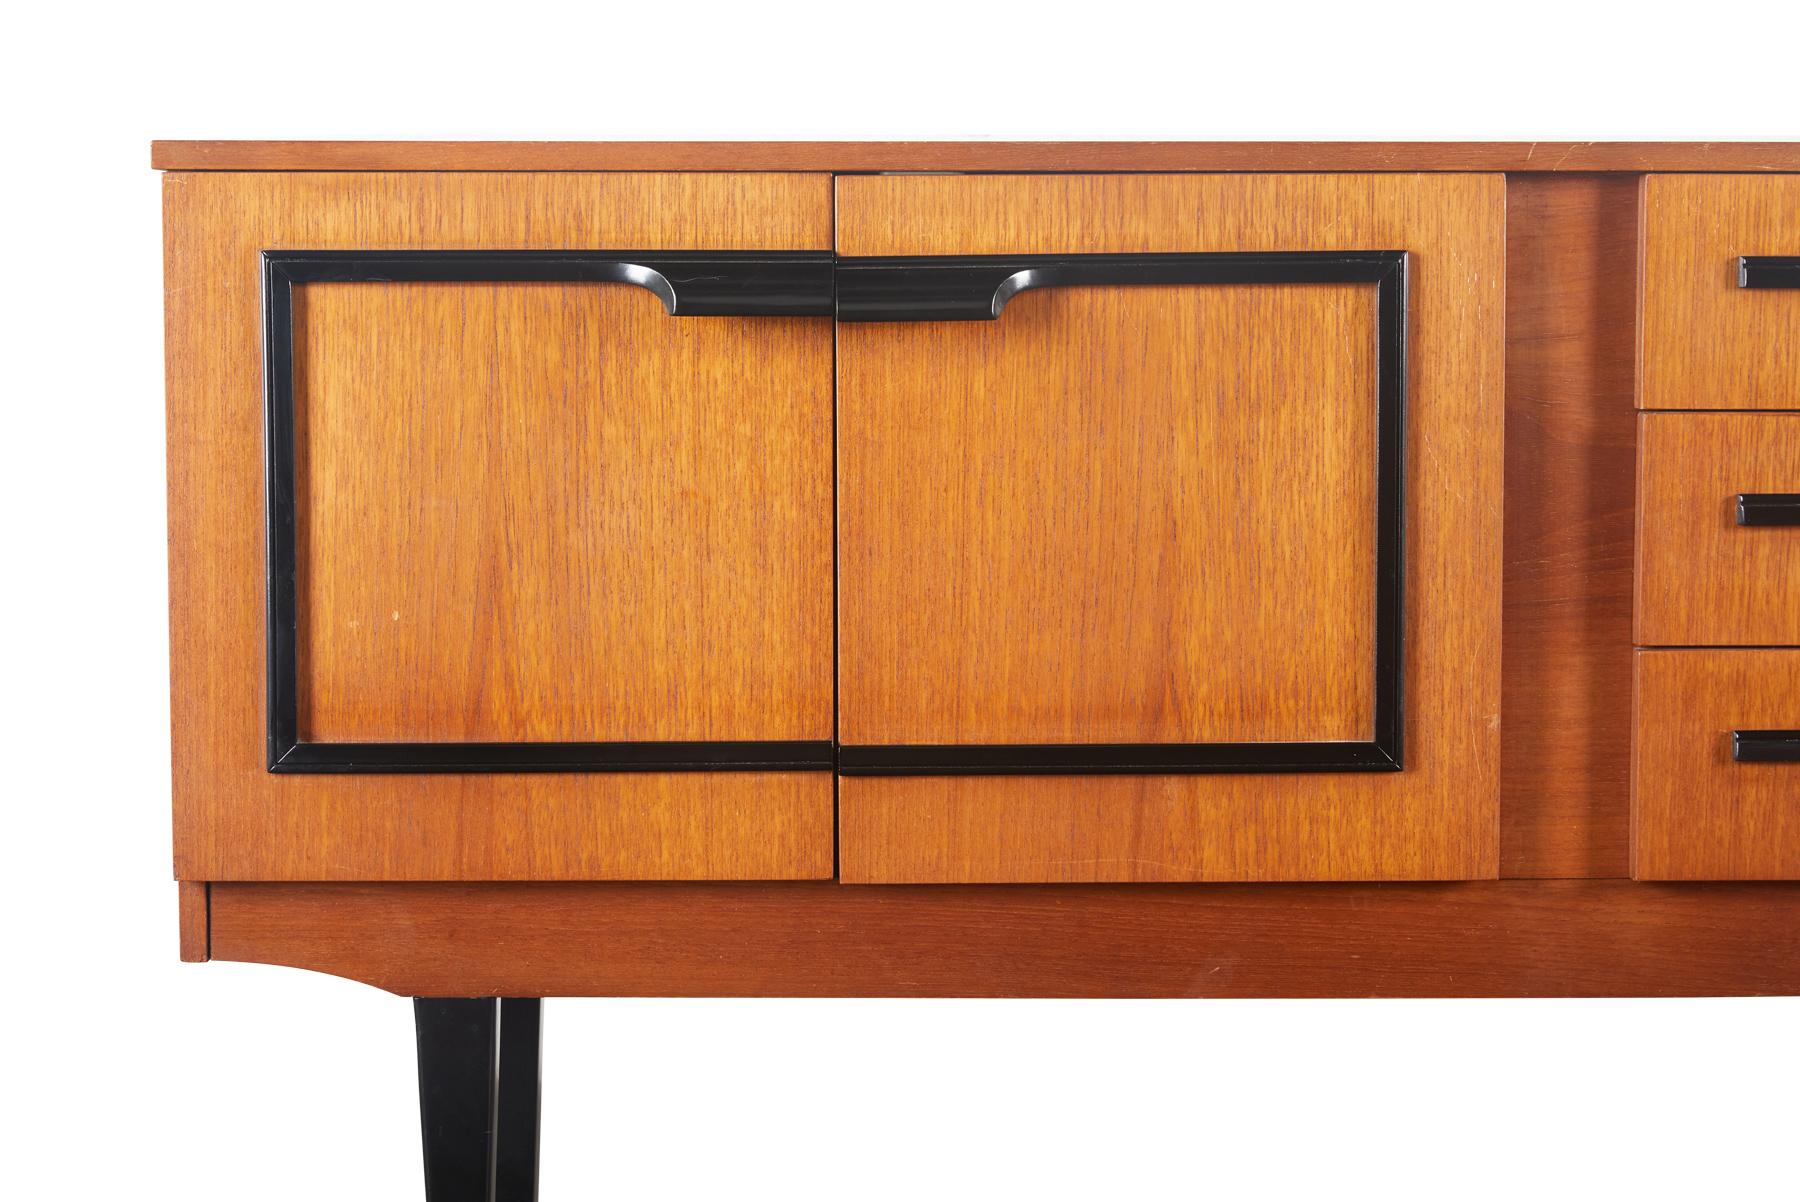 English Modern Midcentury Credenza in Teak with Black Lacquer Accents 3